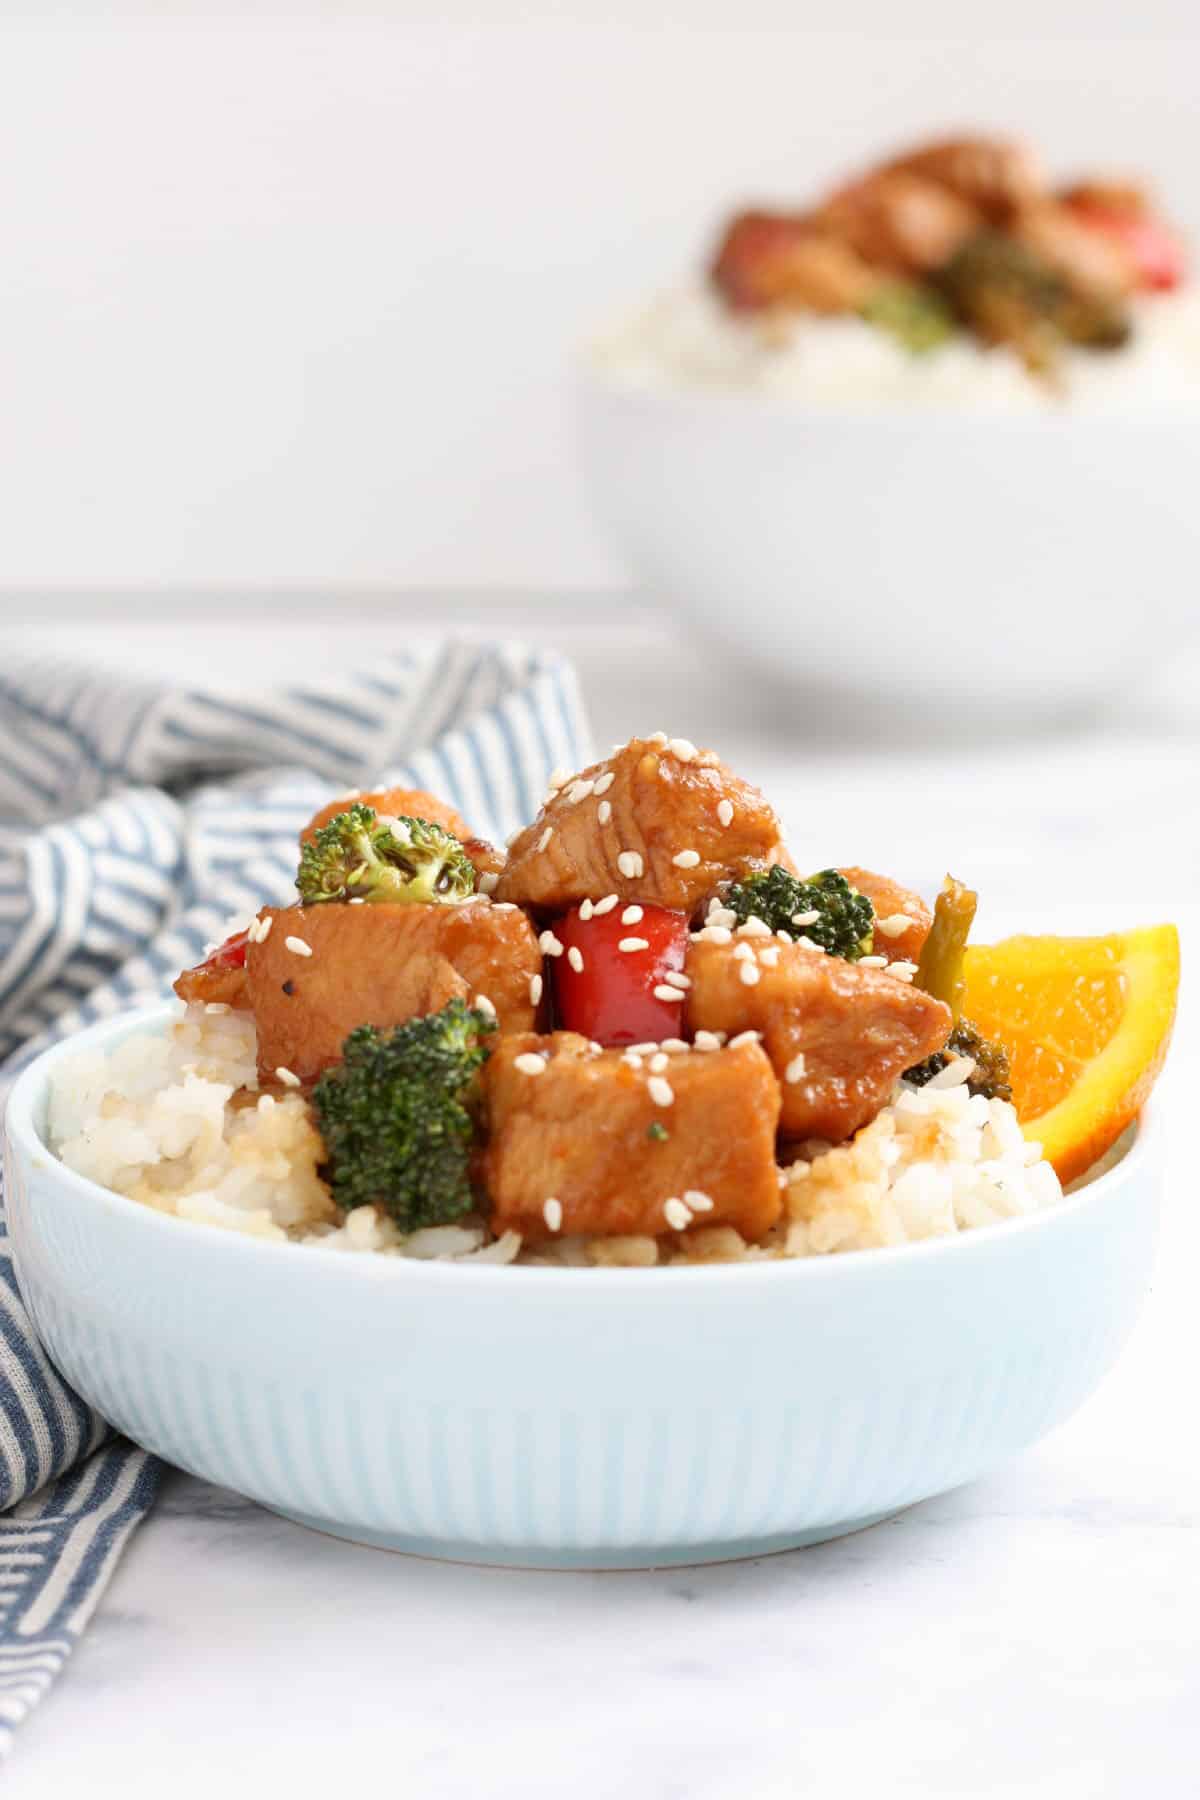 Orange chicken broccoli and peppers served over white rice